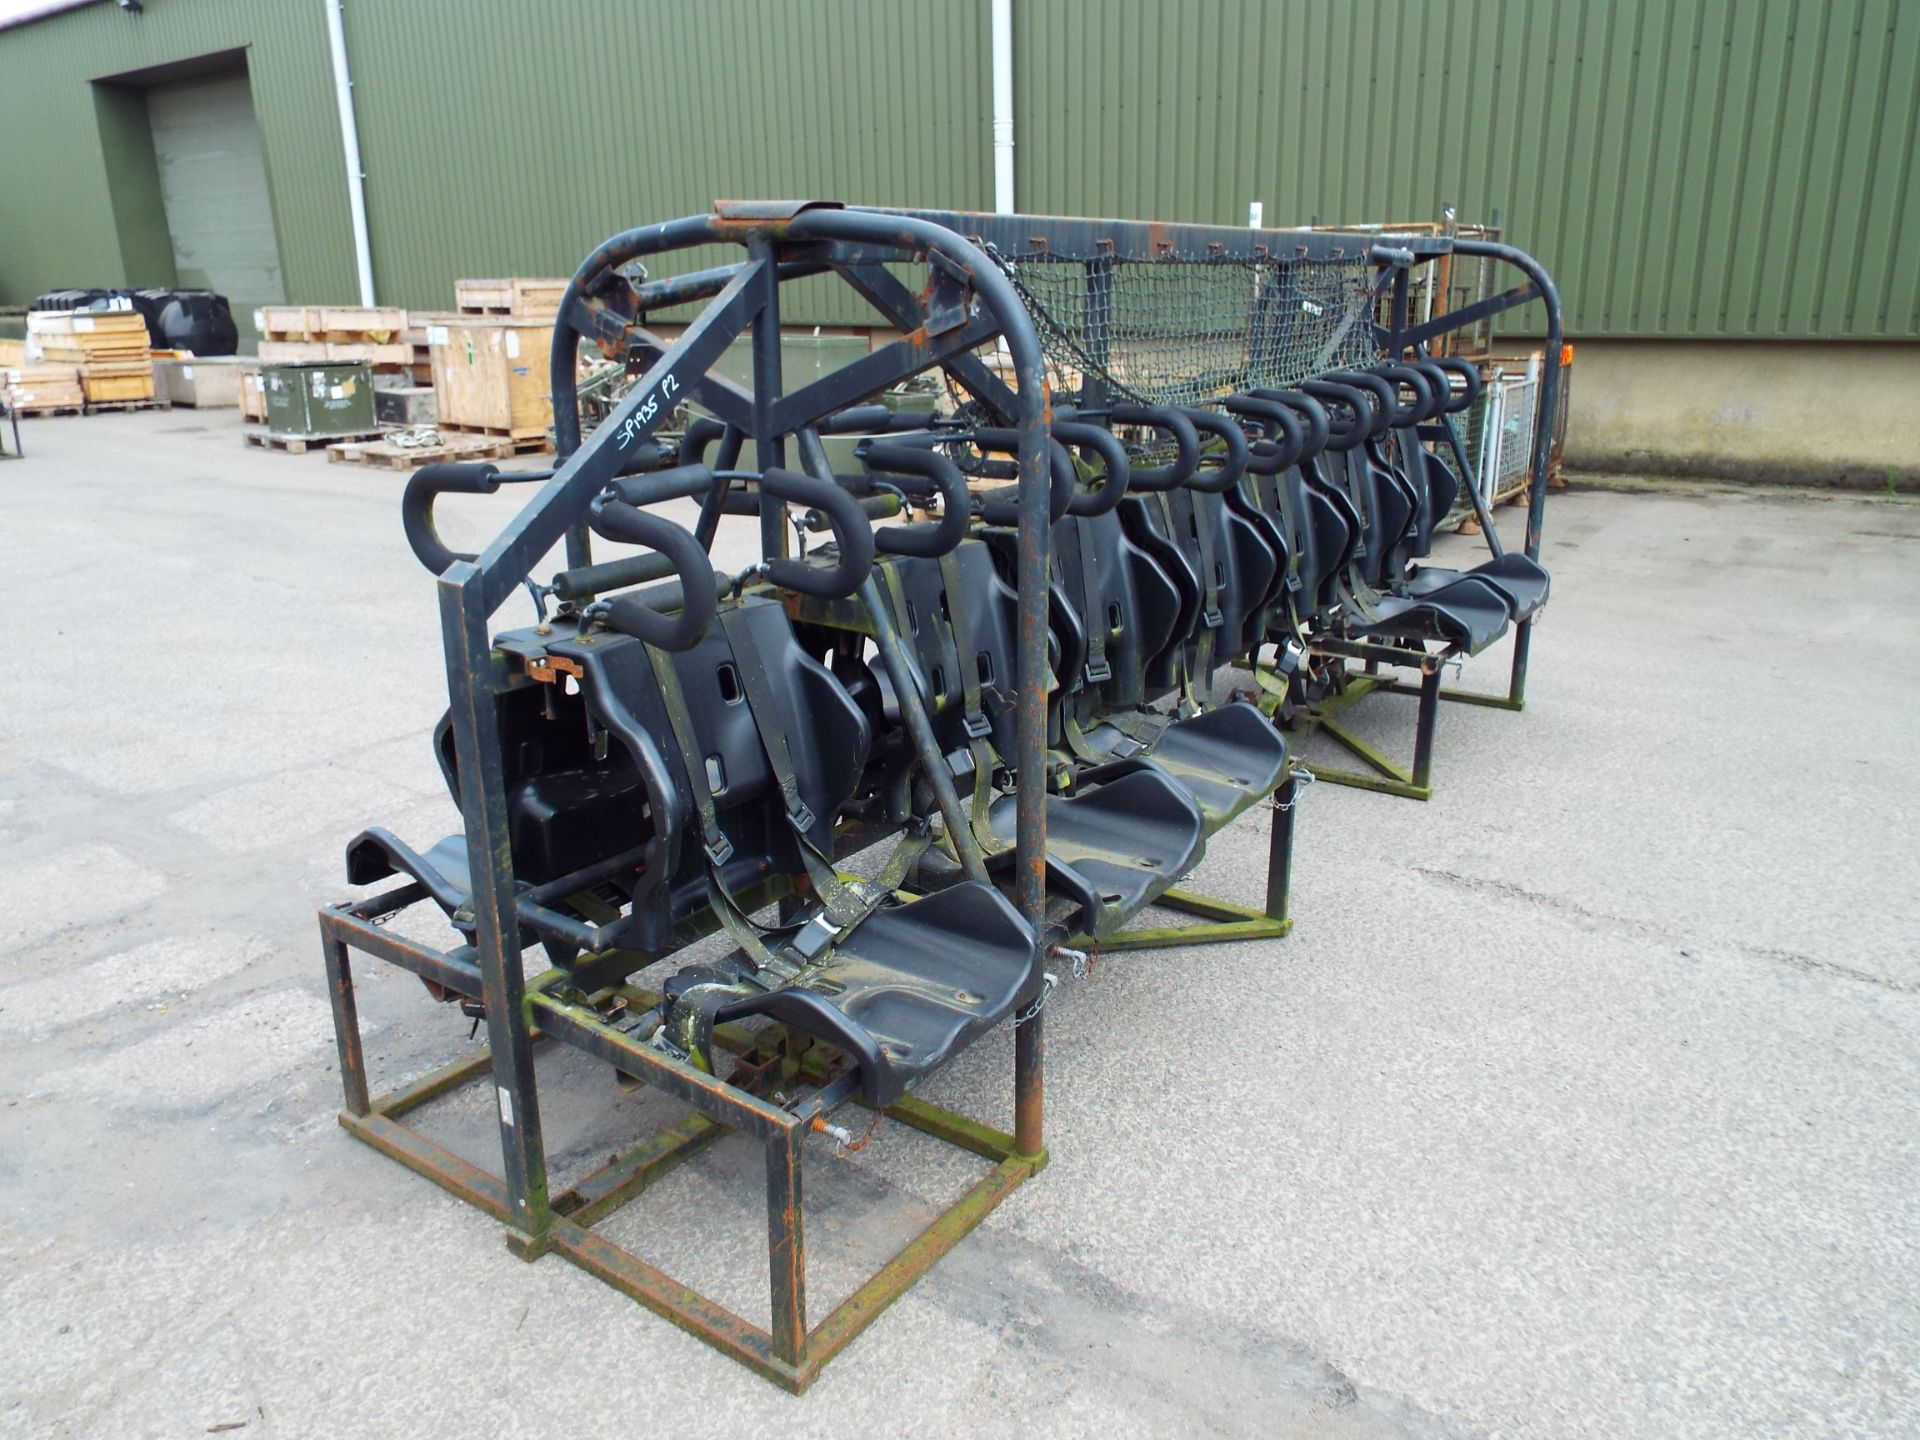 14 Man Security Seat suitable for Leyland Dafs, Bedfords etc - Image 2 of 7